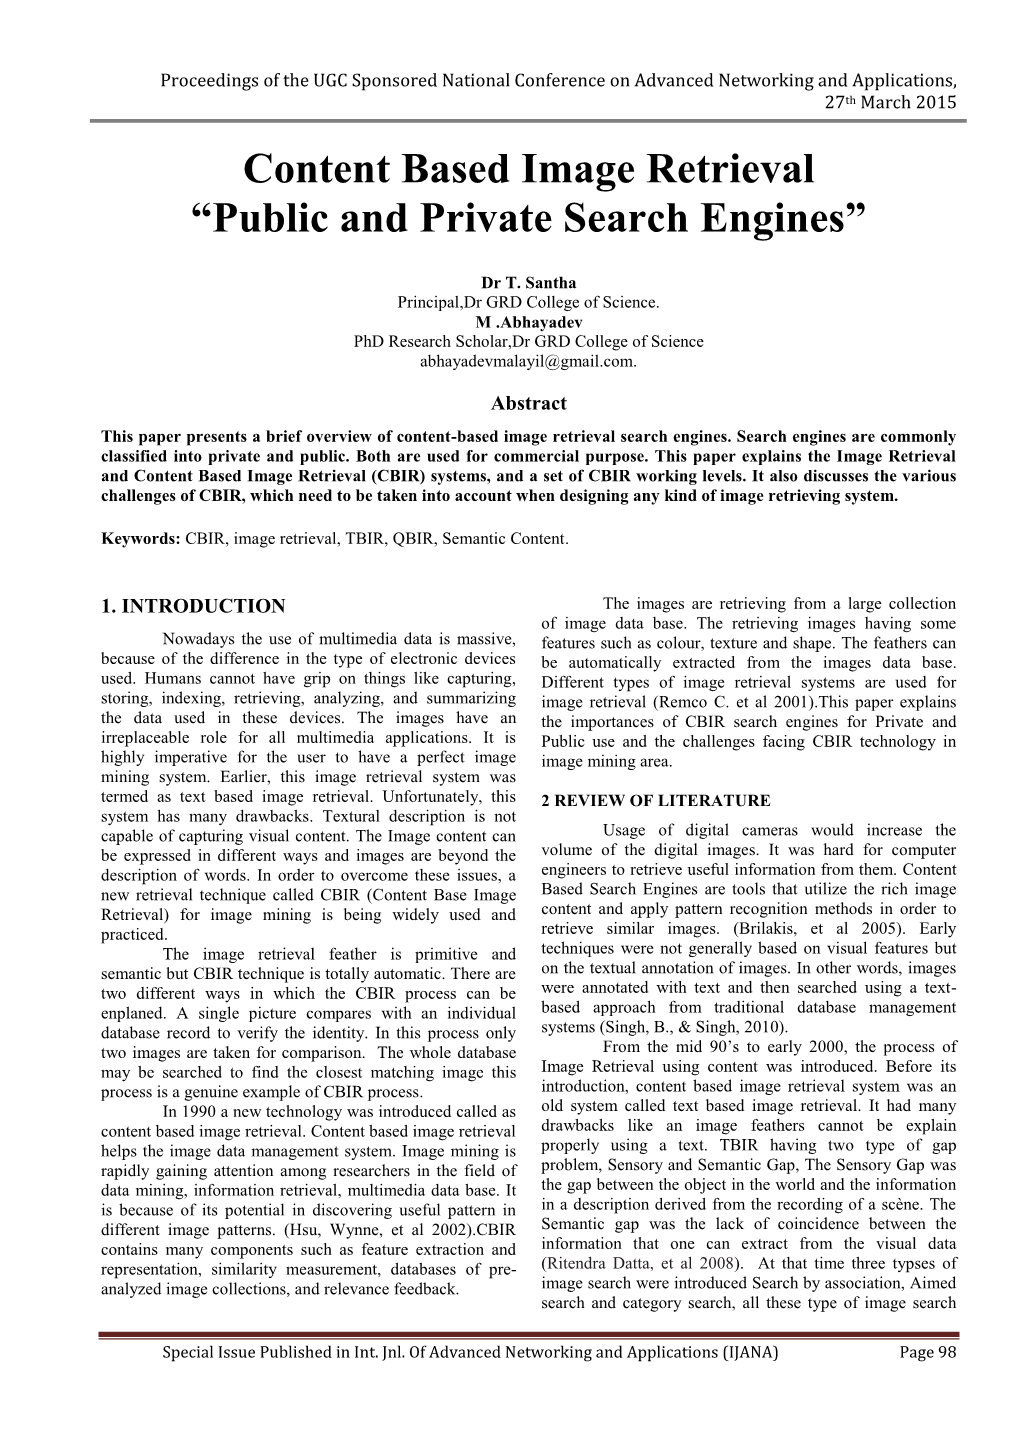 Content Based Image Retrieval “Public and Private Search Engines”